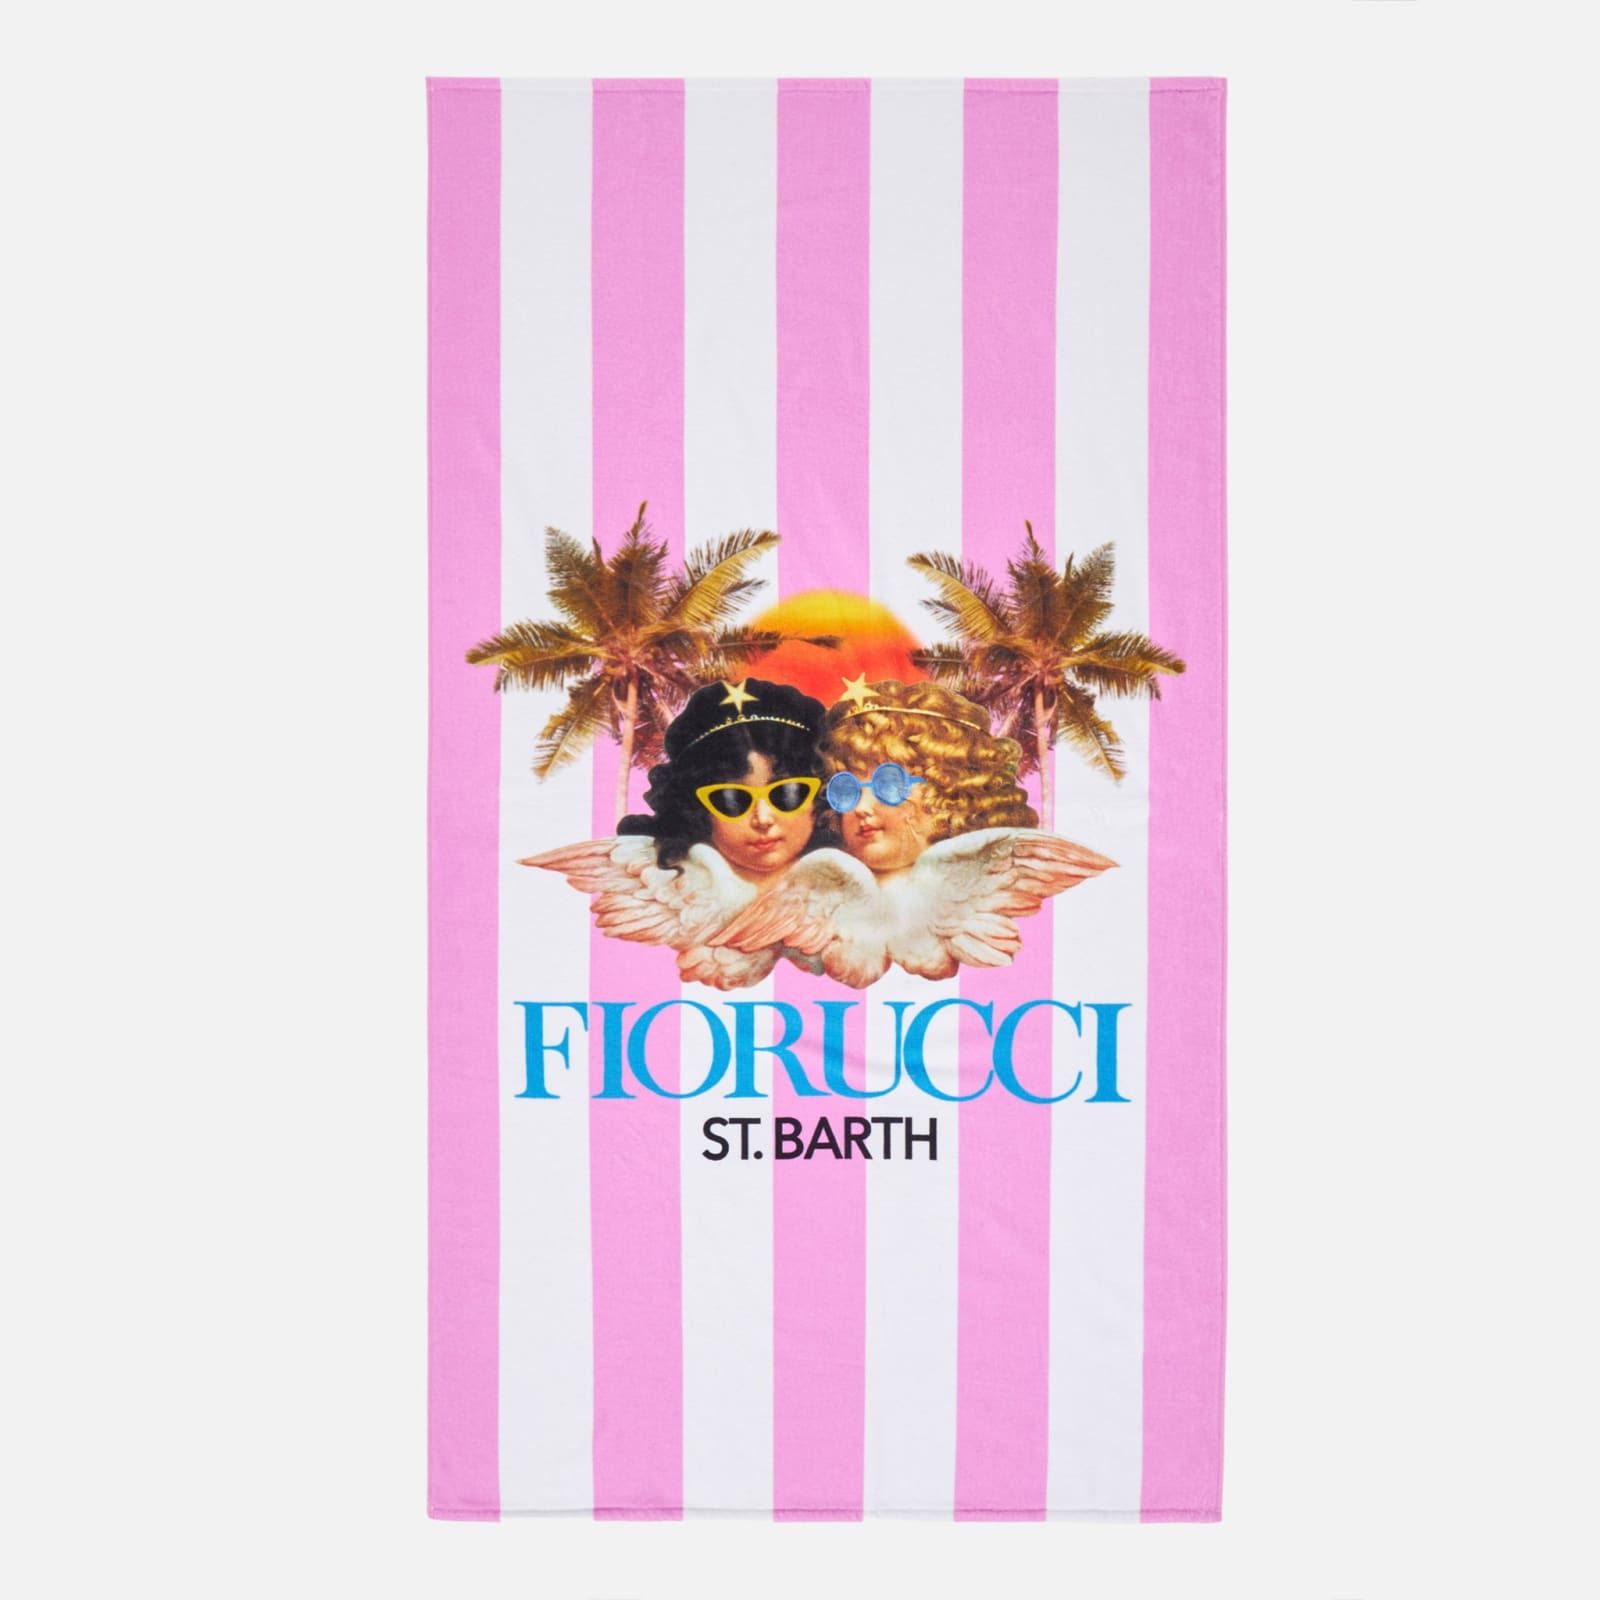 Mc2 Saint Barth Printed Soft Terry Beach Towel With Stripes And Fiorucci Angels Fiorucci Special Edition In Pink